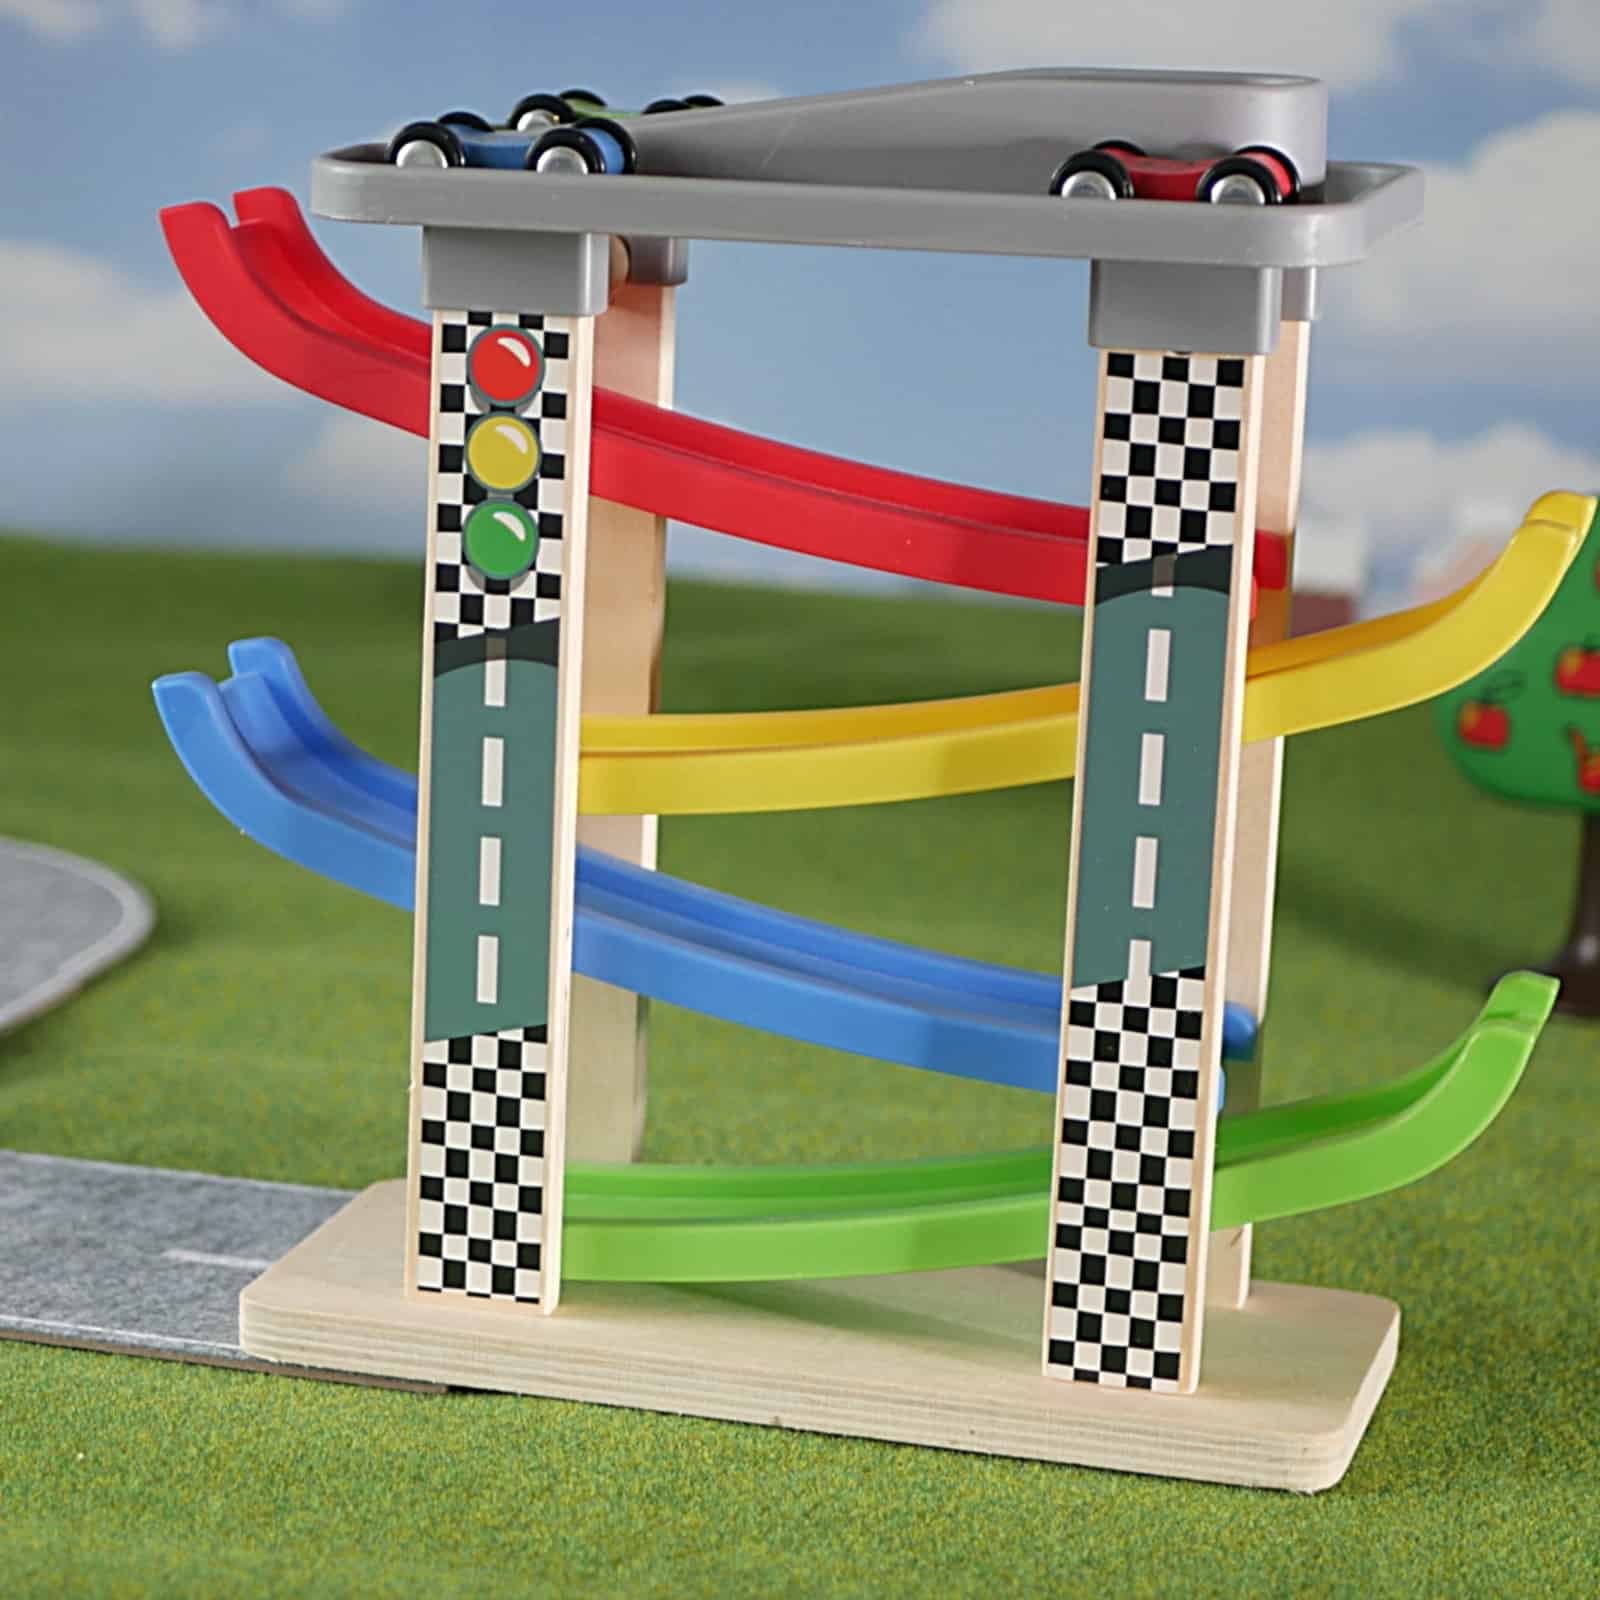 Best toy garage for toddler: Top Bright race car track